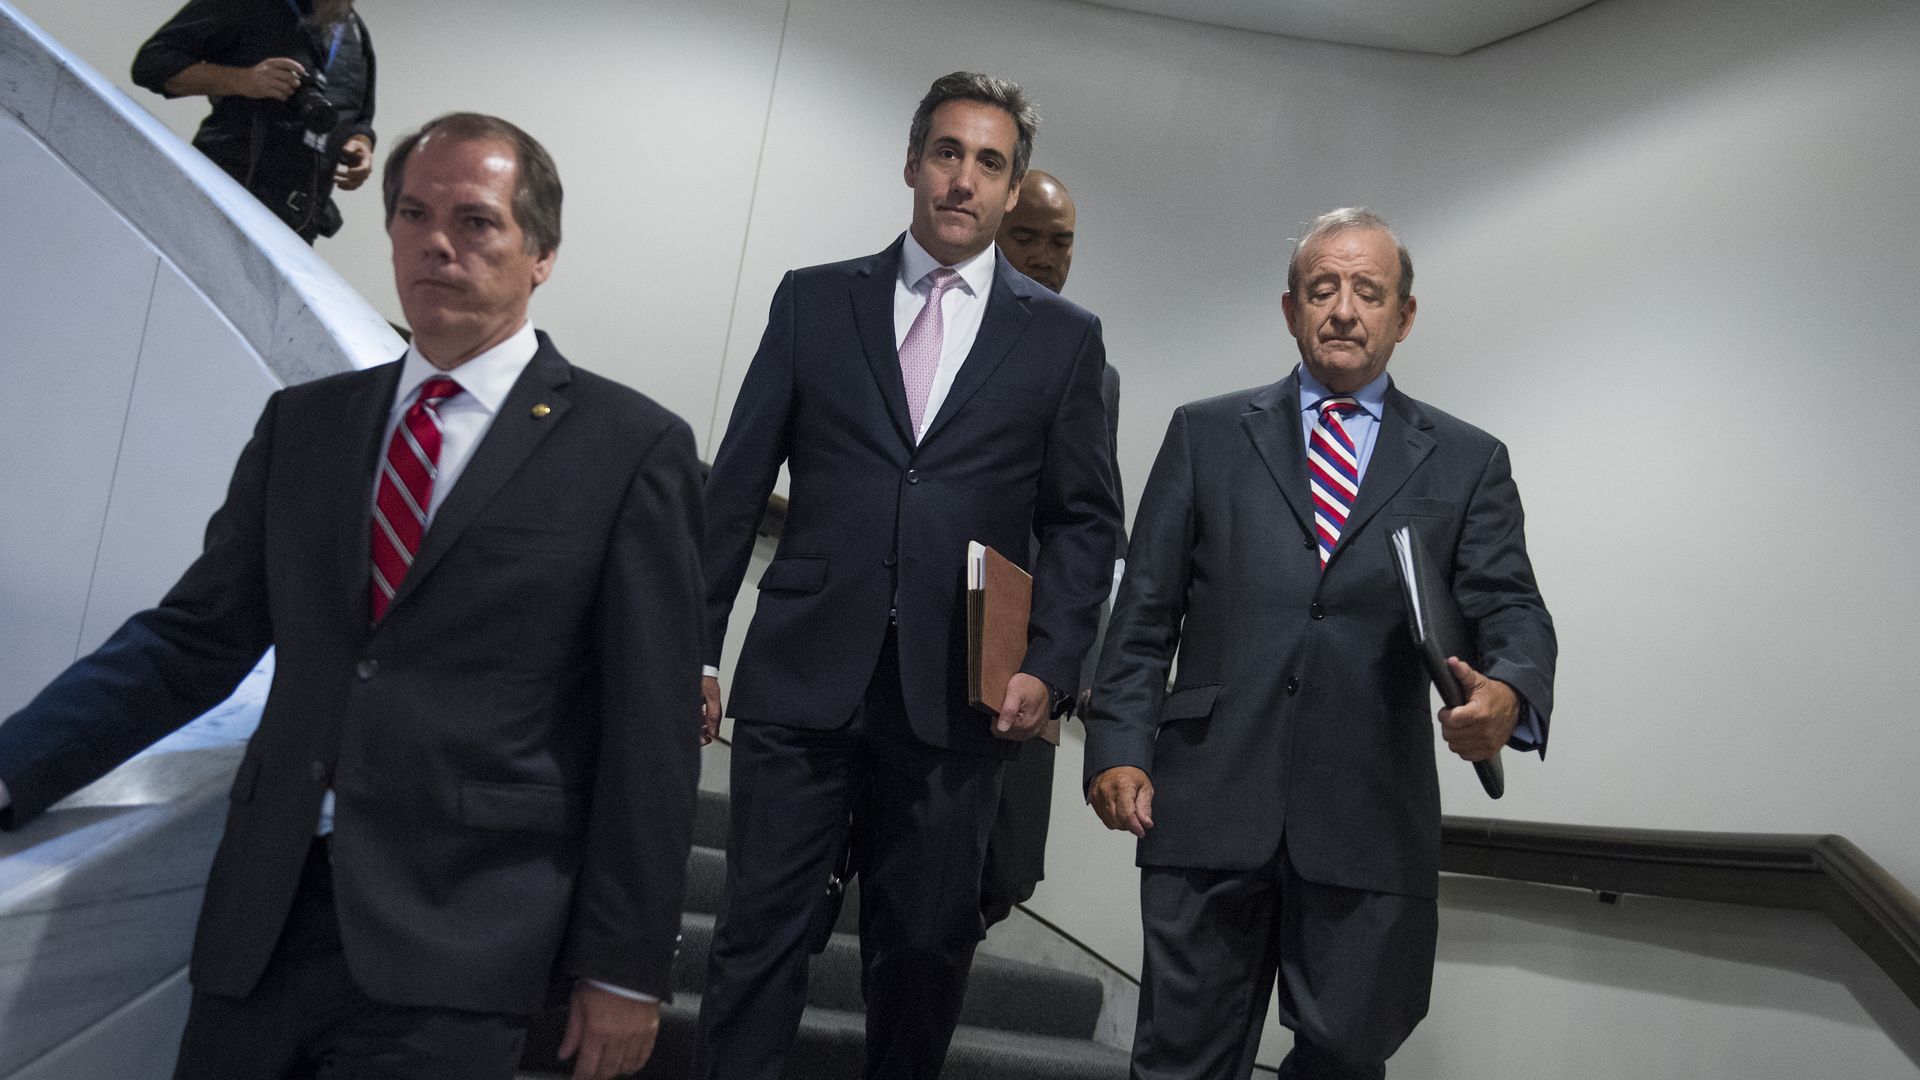 Michael Cohen, center, following his meeting with the Senate Intelligence Committee. Photo: By Tom Williams / CQ Roll Call